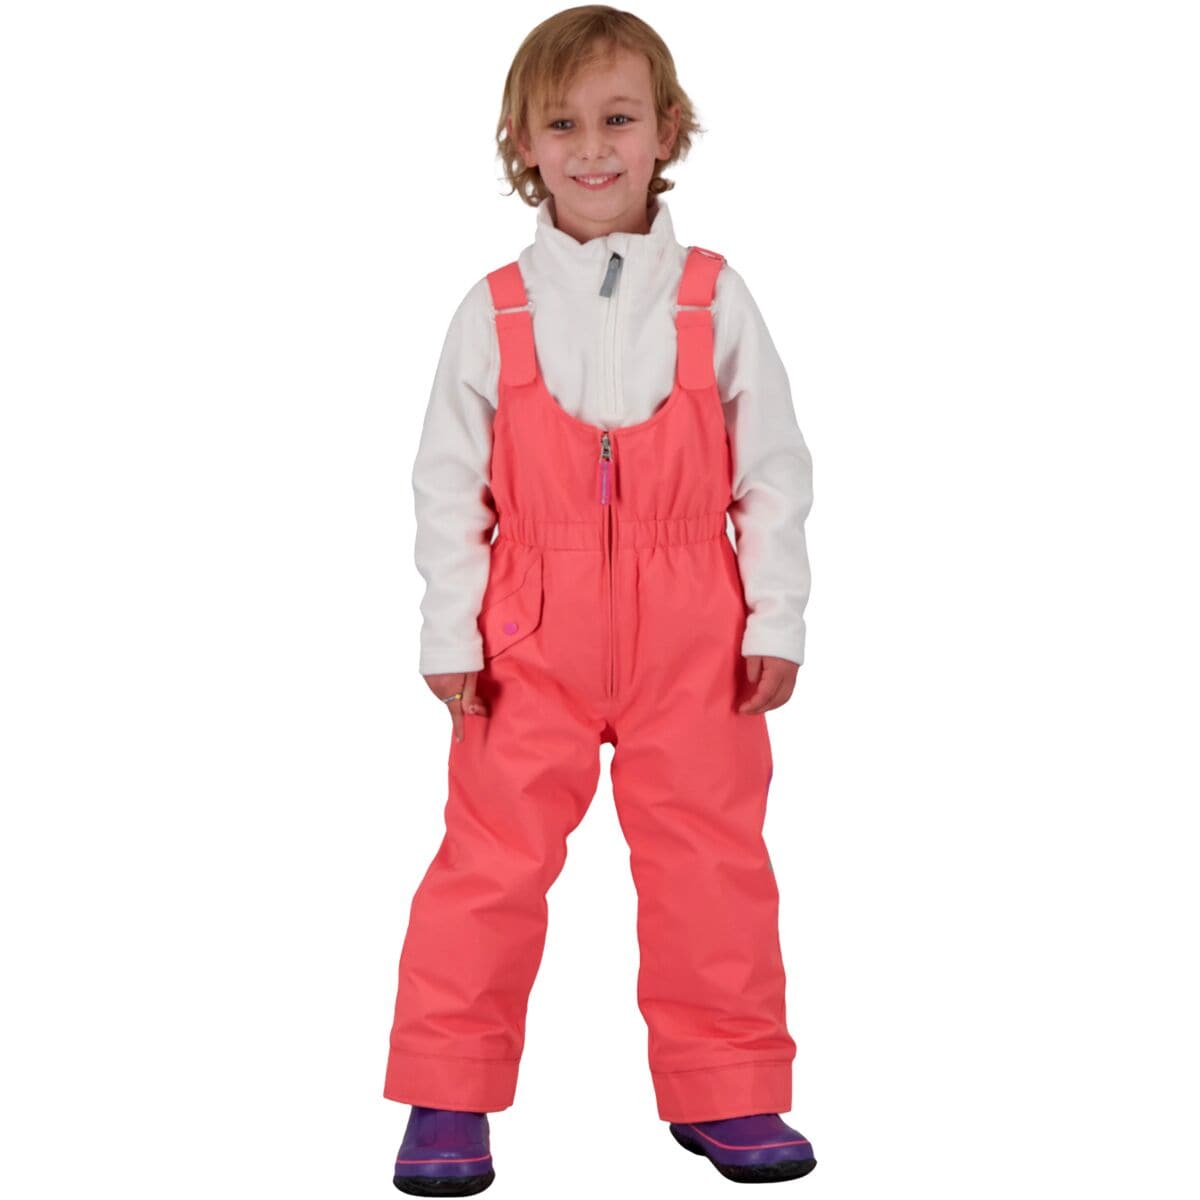 Obermeyer Snoverall Pant - Toddler Girls' Wild Coral